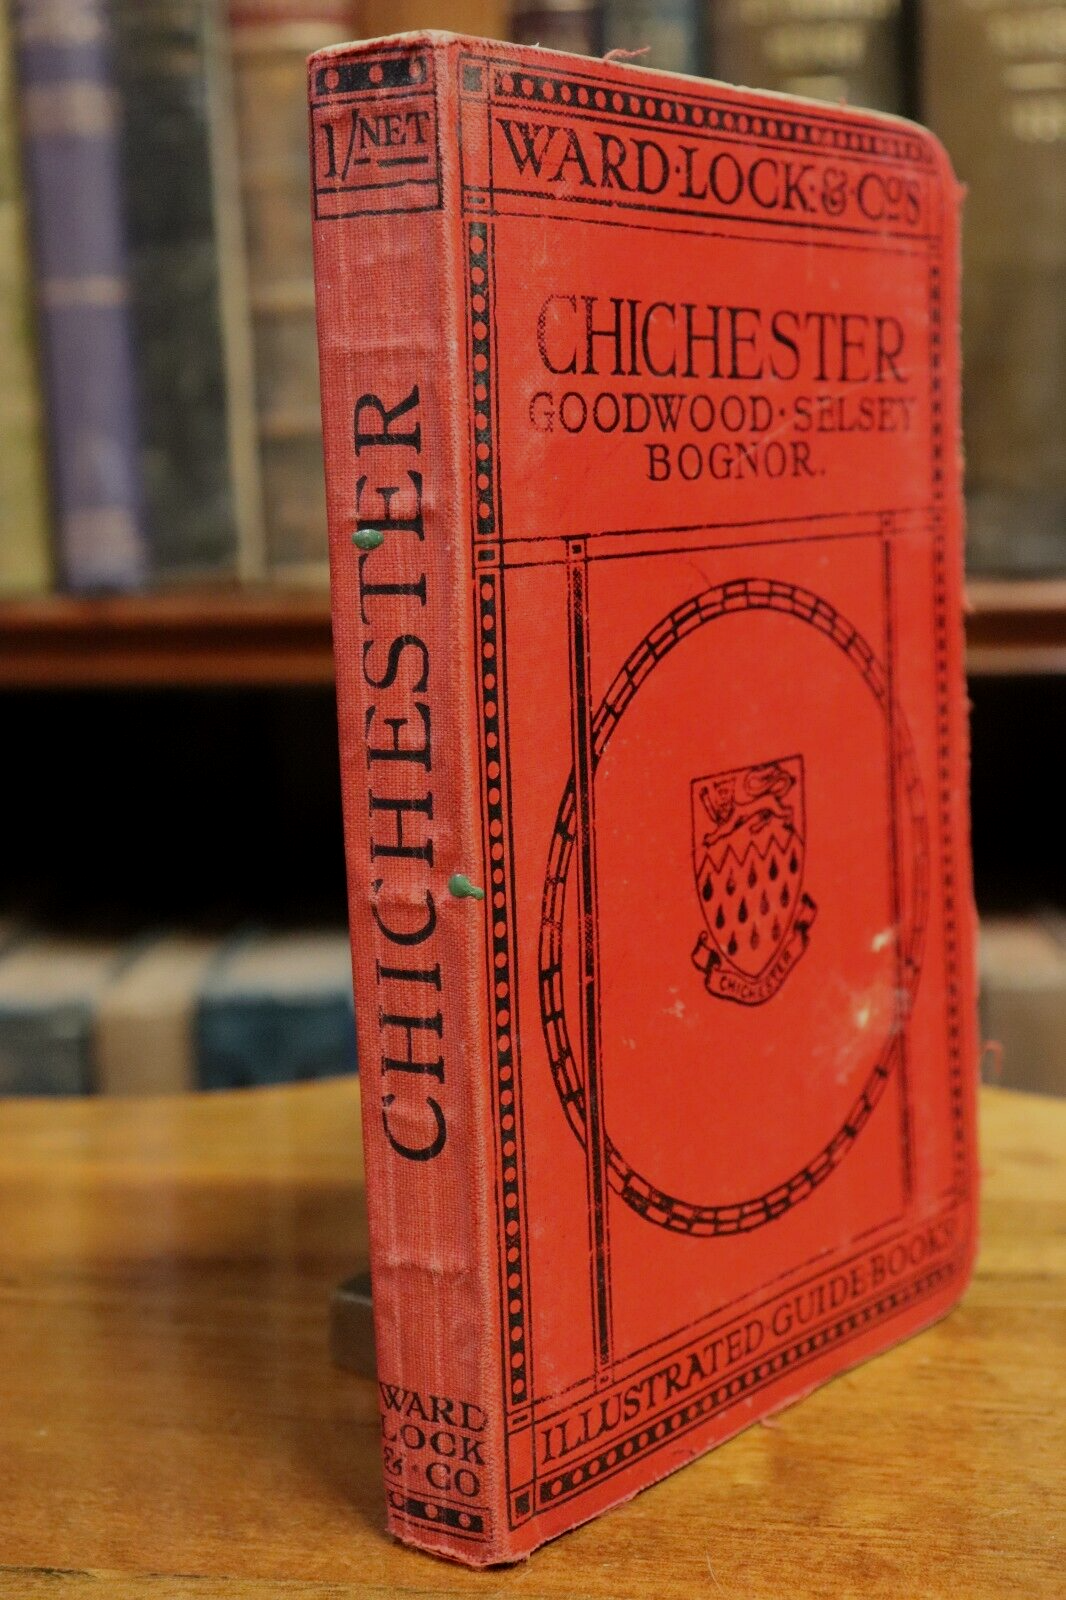 Guide To Chichester: Ward Lock & Co - c1920 - Antique Travel Guide Book w/Maps